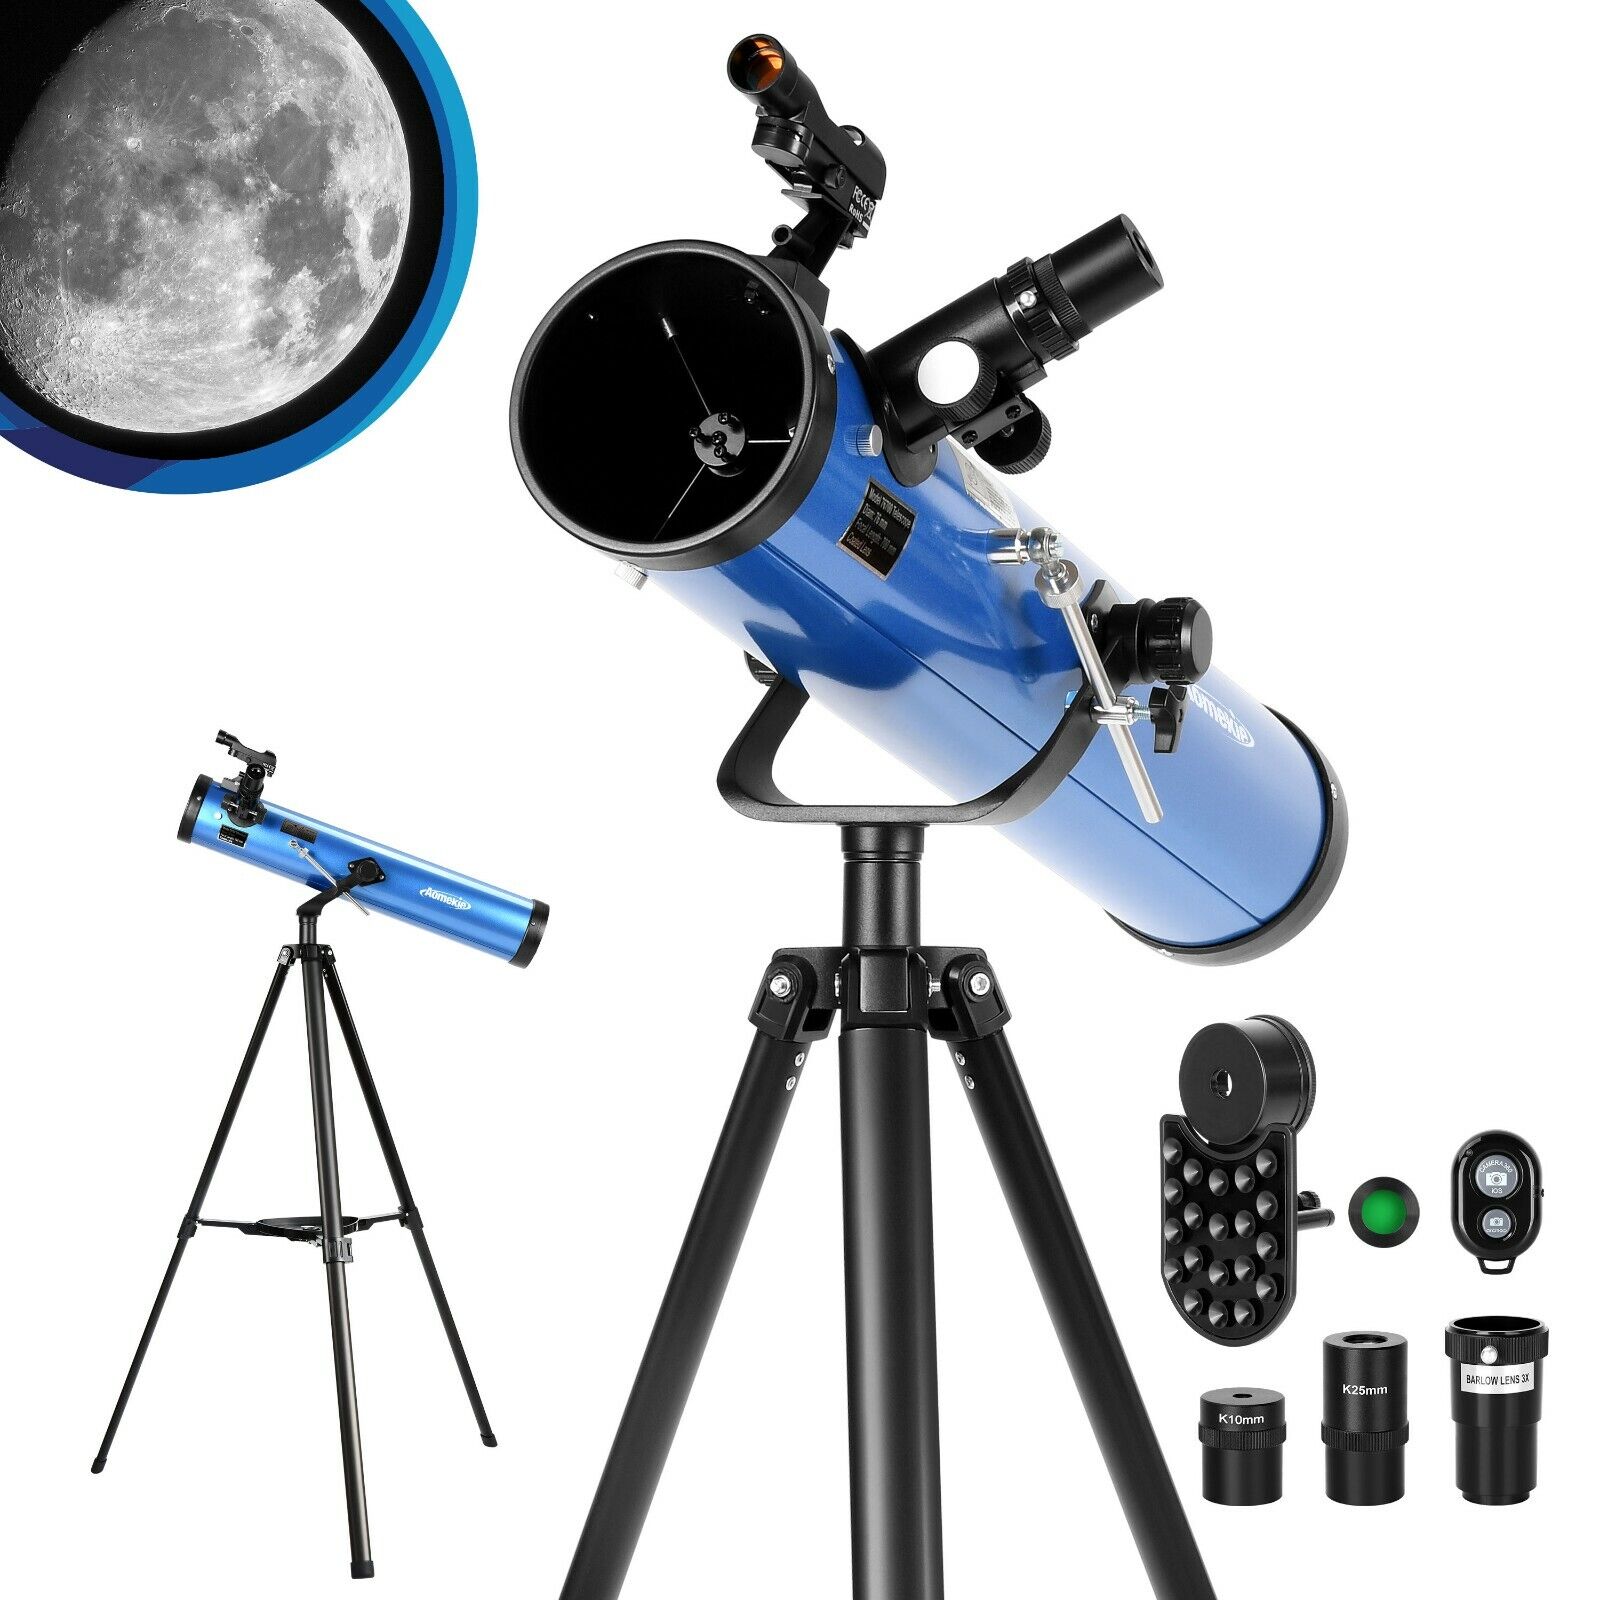 700mm Reflector Astronomical Telescope 210X with Phone Adapter for Moon Watching